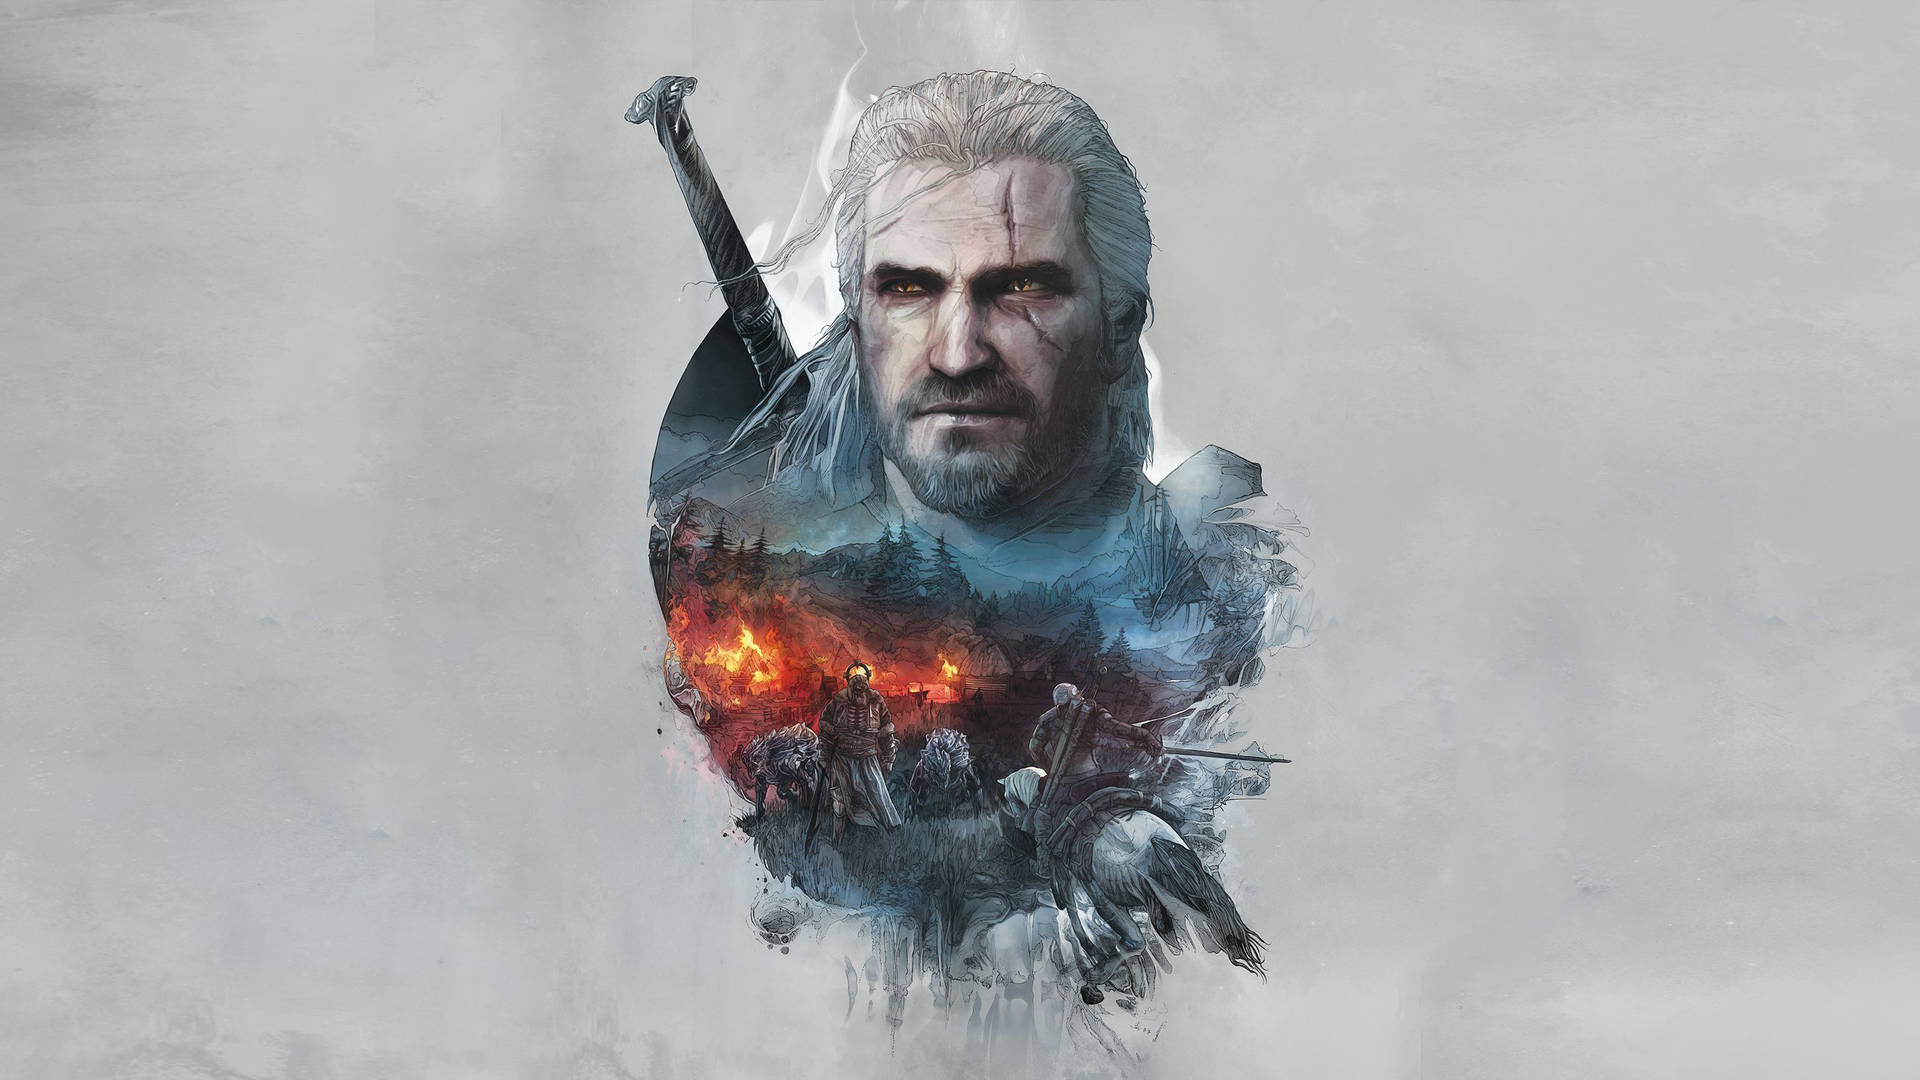 "When the Hunt Calls, A Witcher Responds" Wallpaper